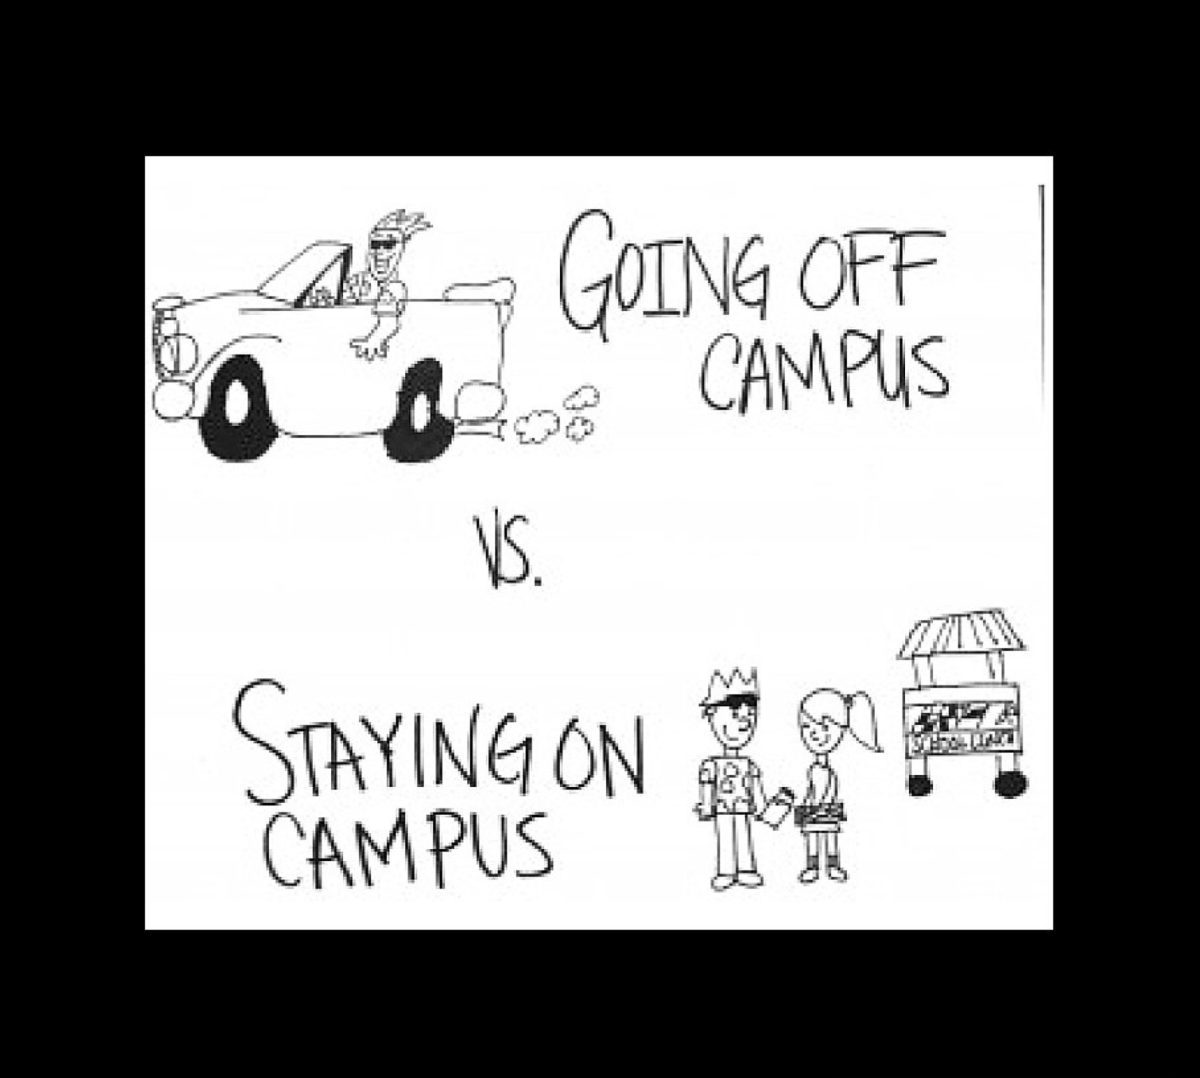 Should Open Campus Be Allowed?